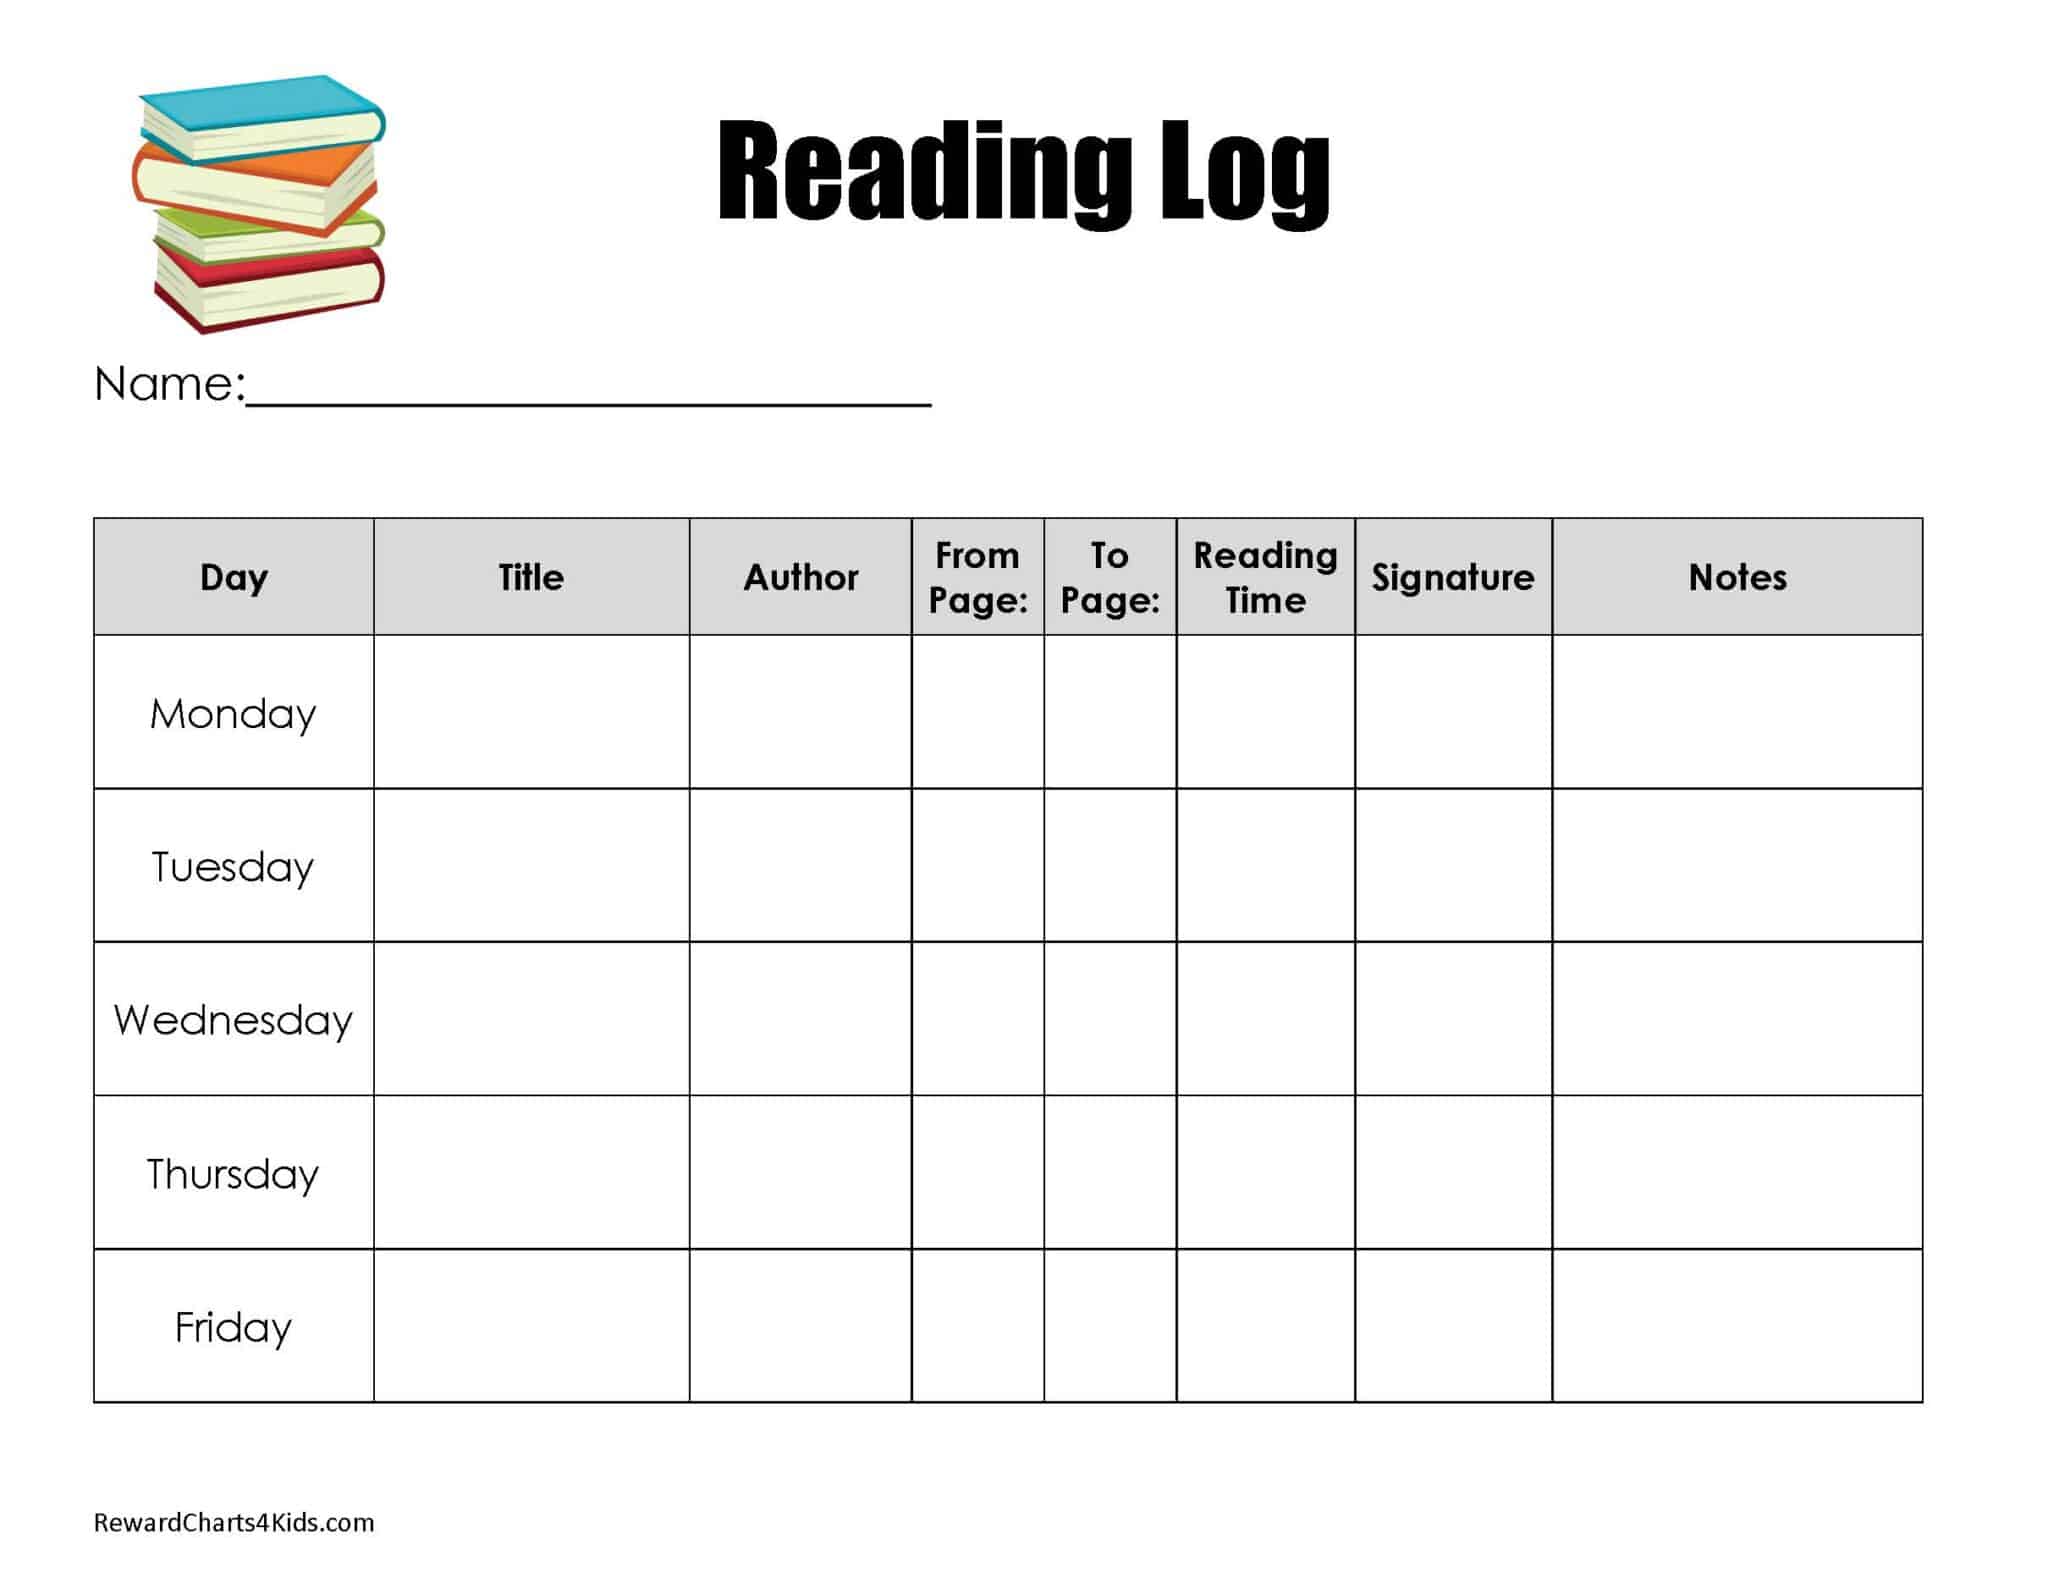 free-printable-reading-chart-templates-many-designs-available